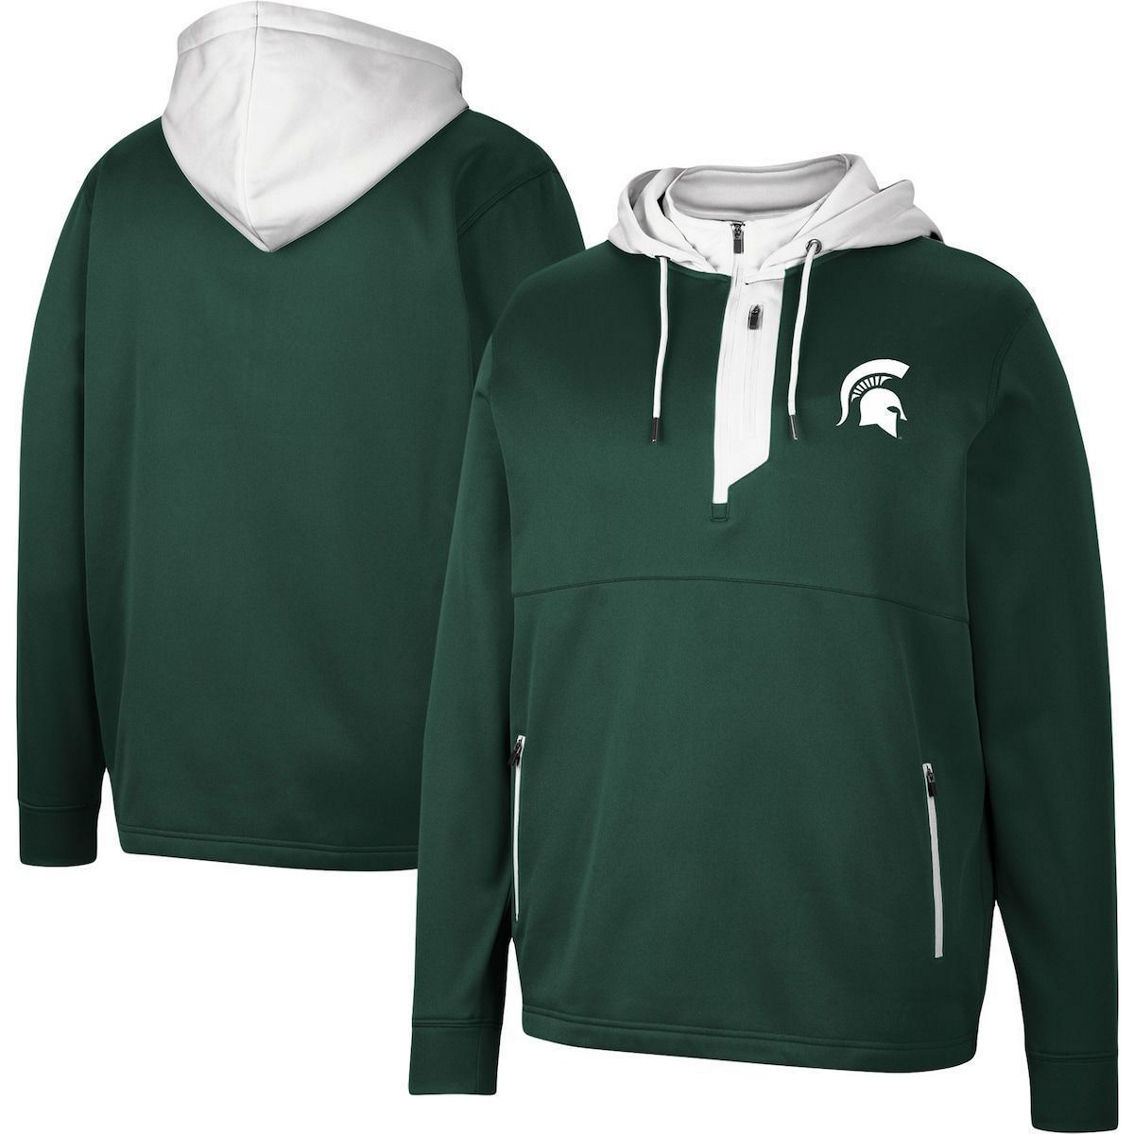 Colosseum Men's Green Michigan State Spartans Luge 3.0 Quarter-Zip Hoodie - Image 2 of 4